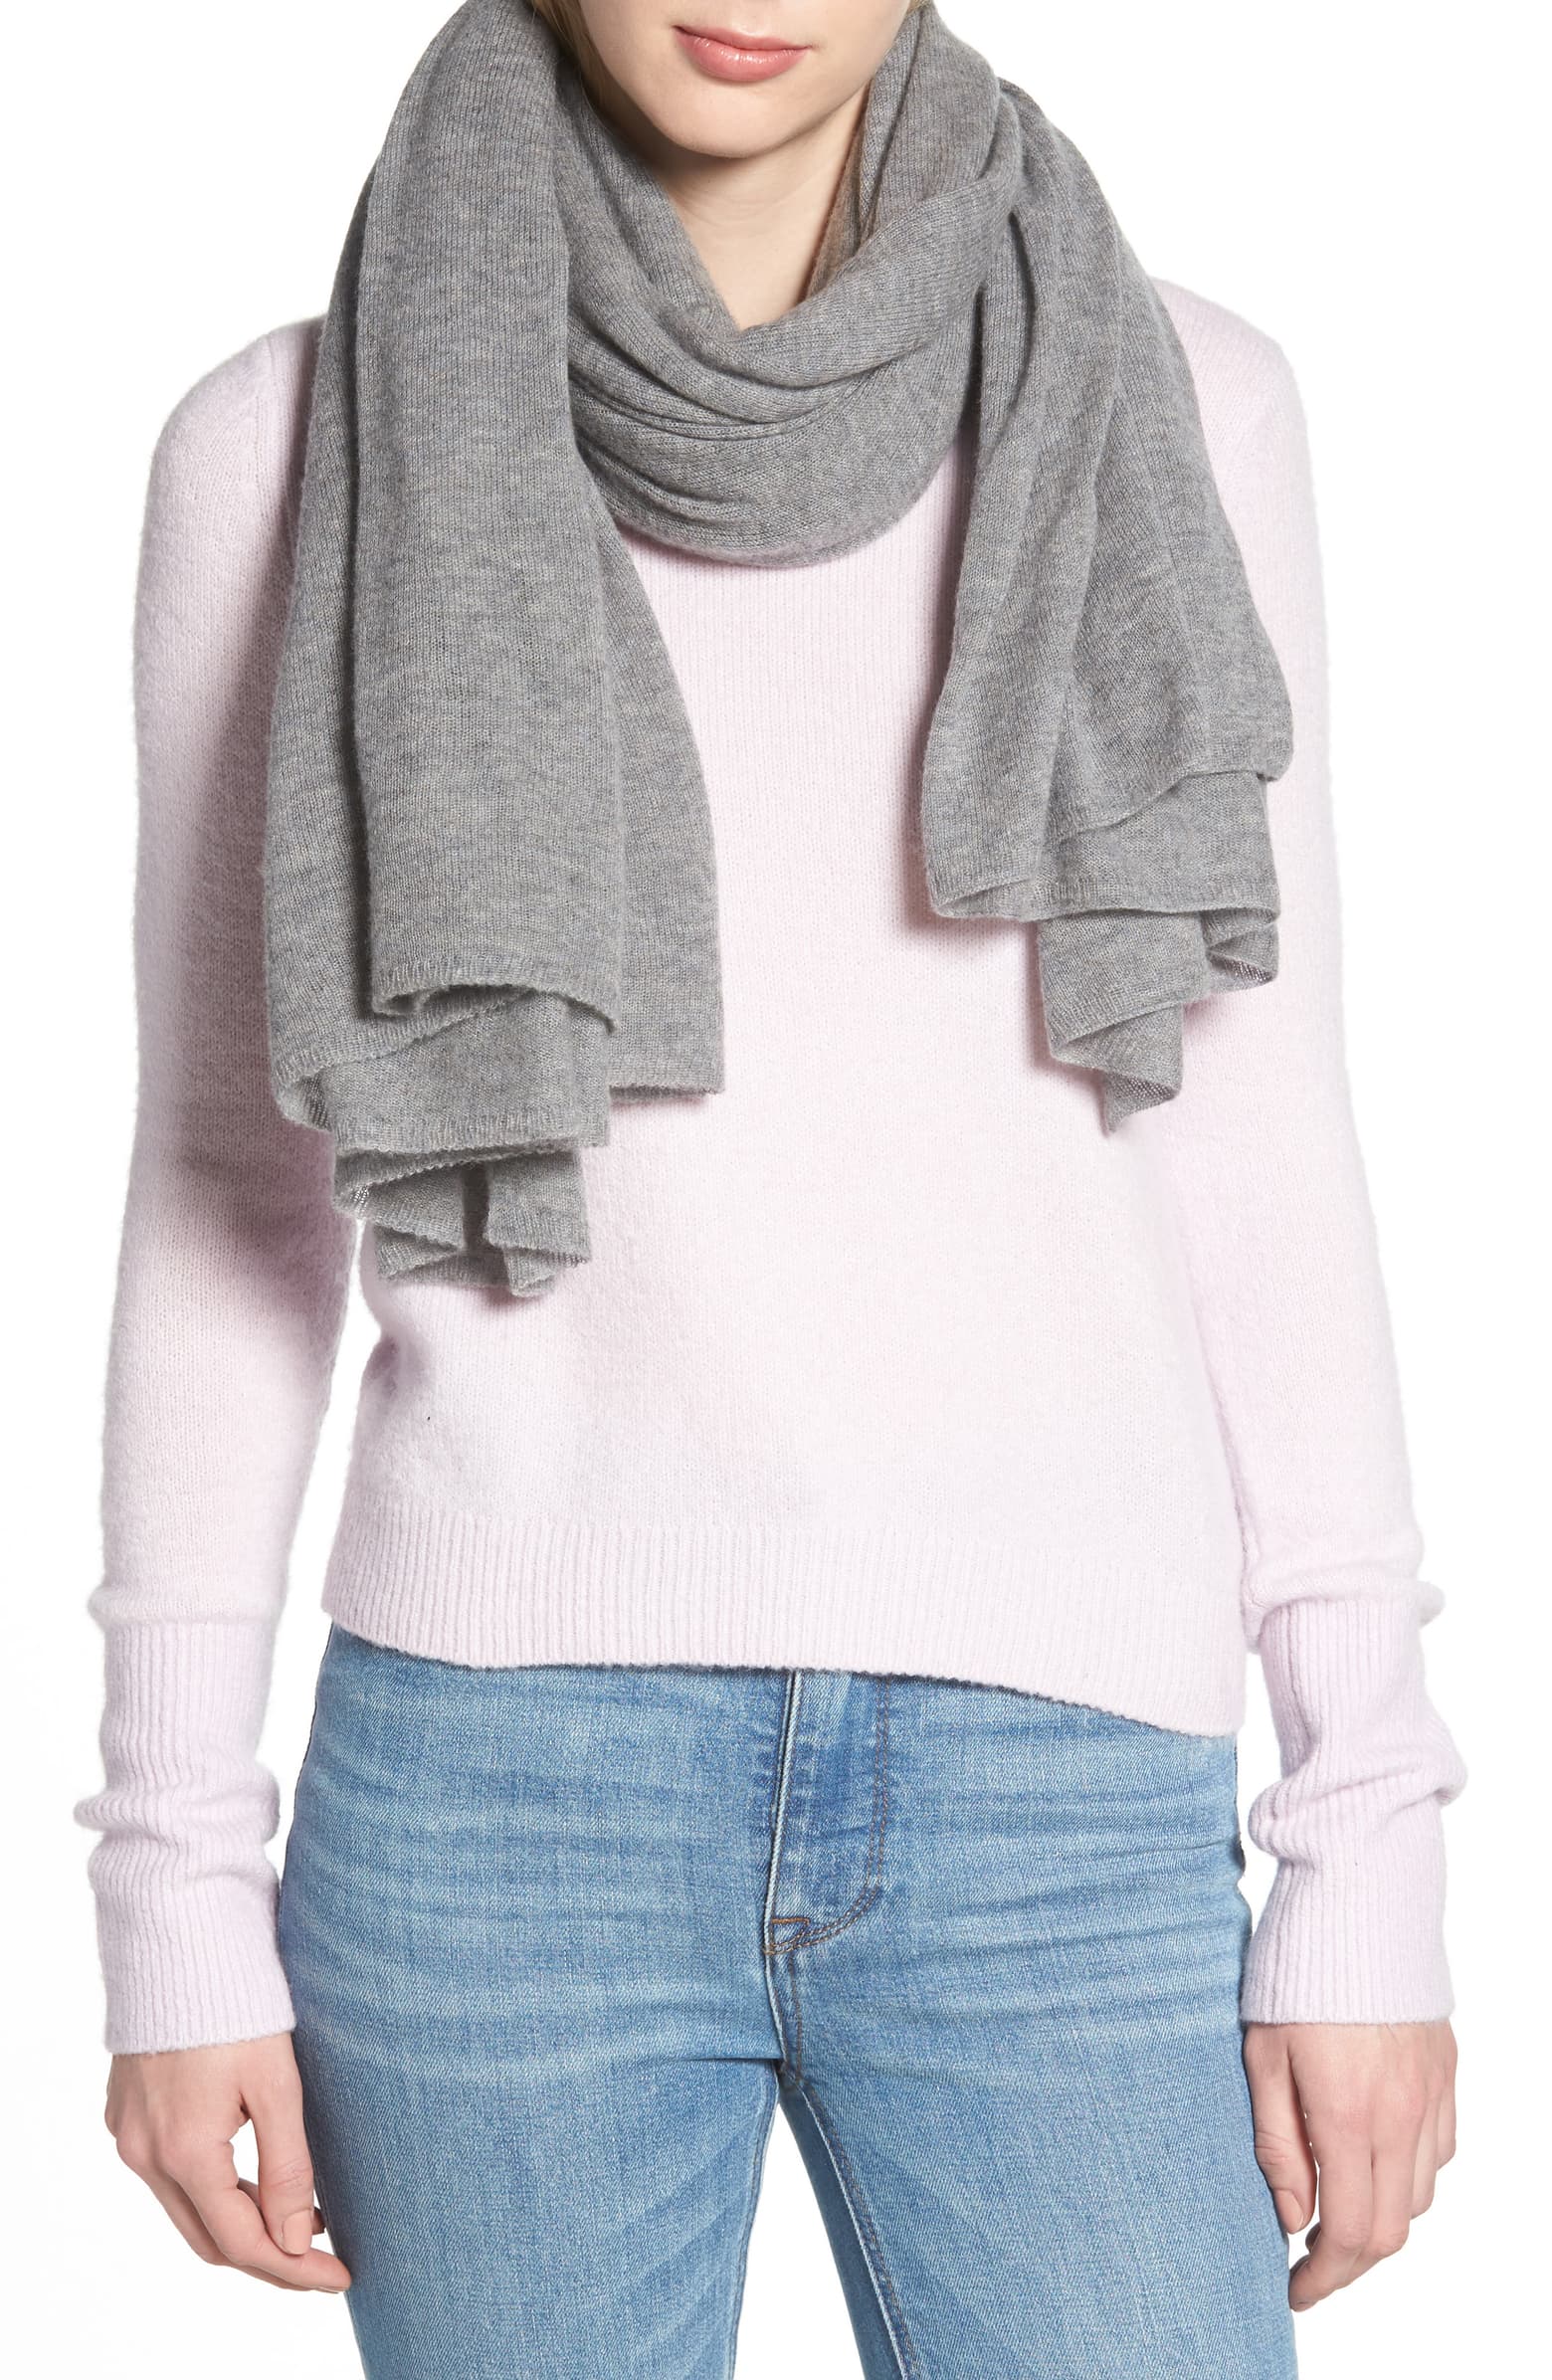 Nordstrom Cashmere Scarf Grey - Karina Style Diaries